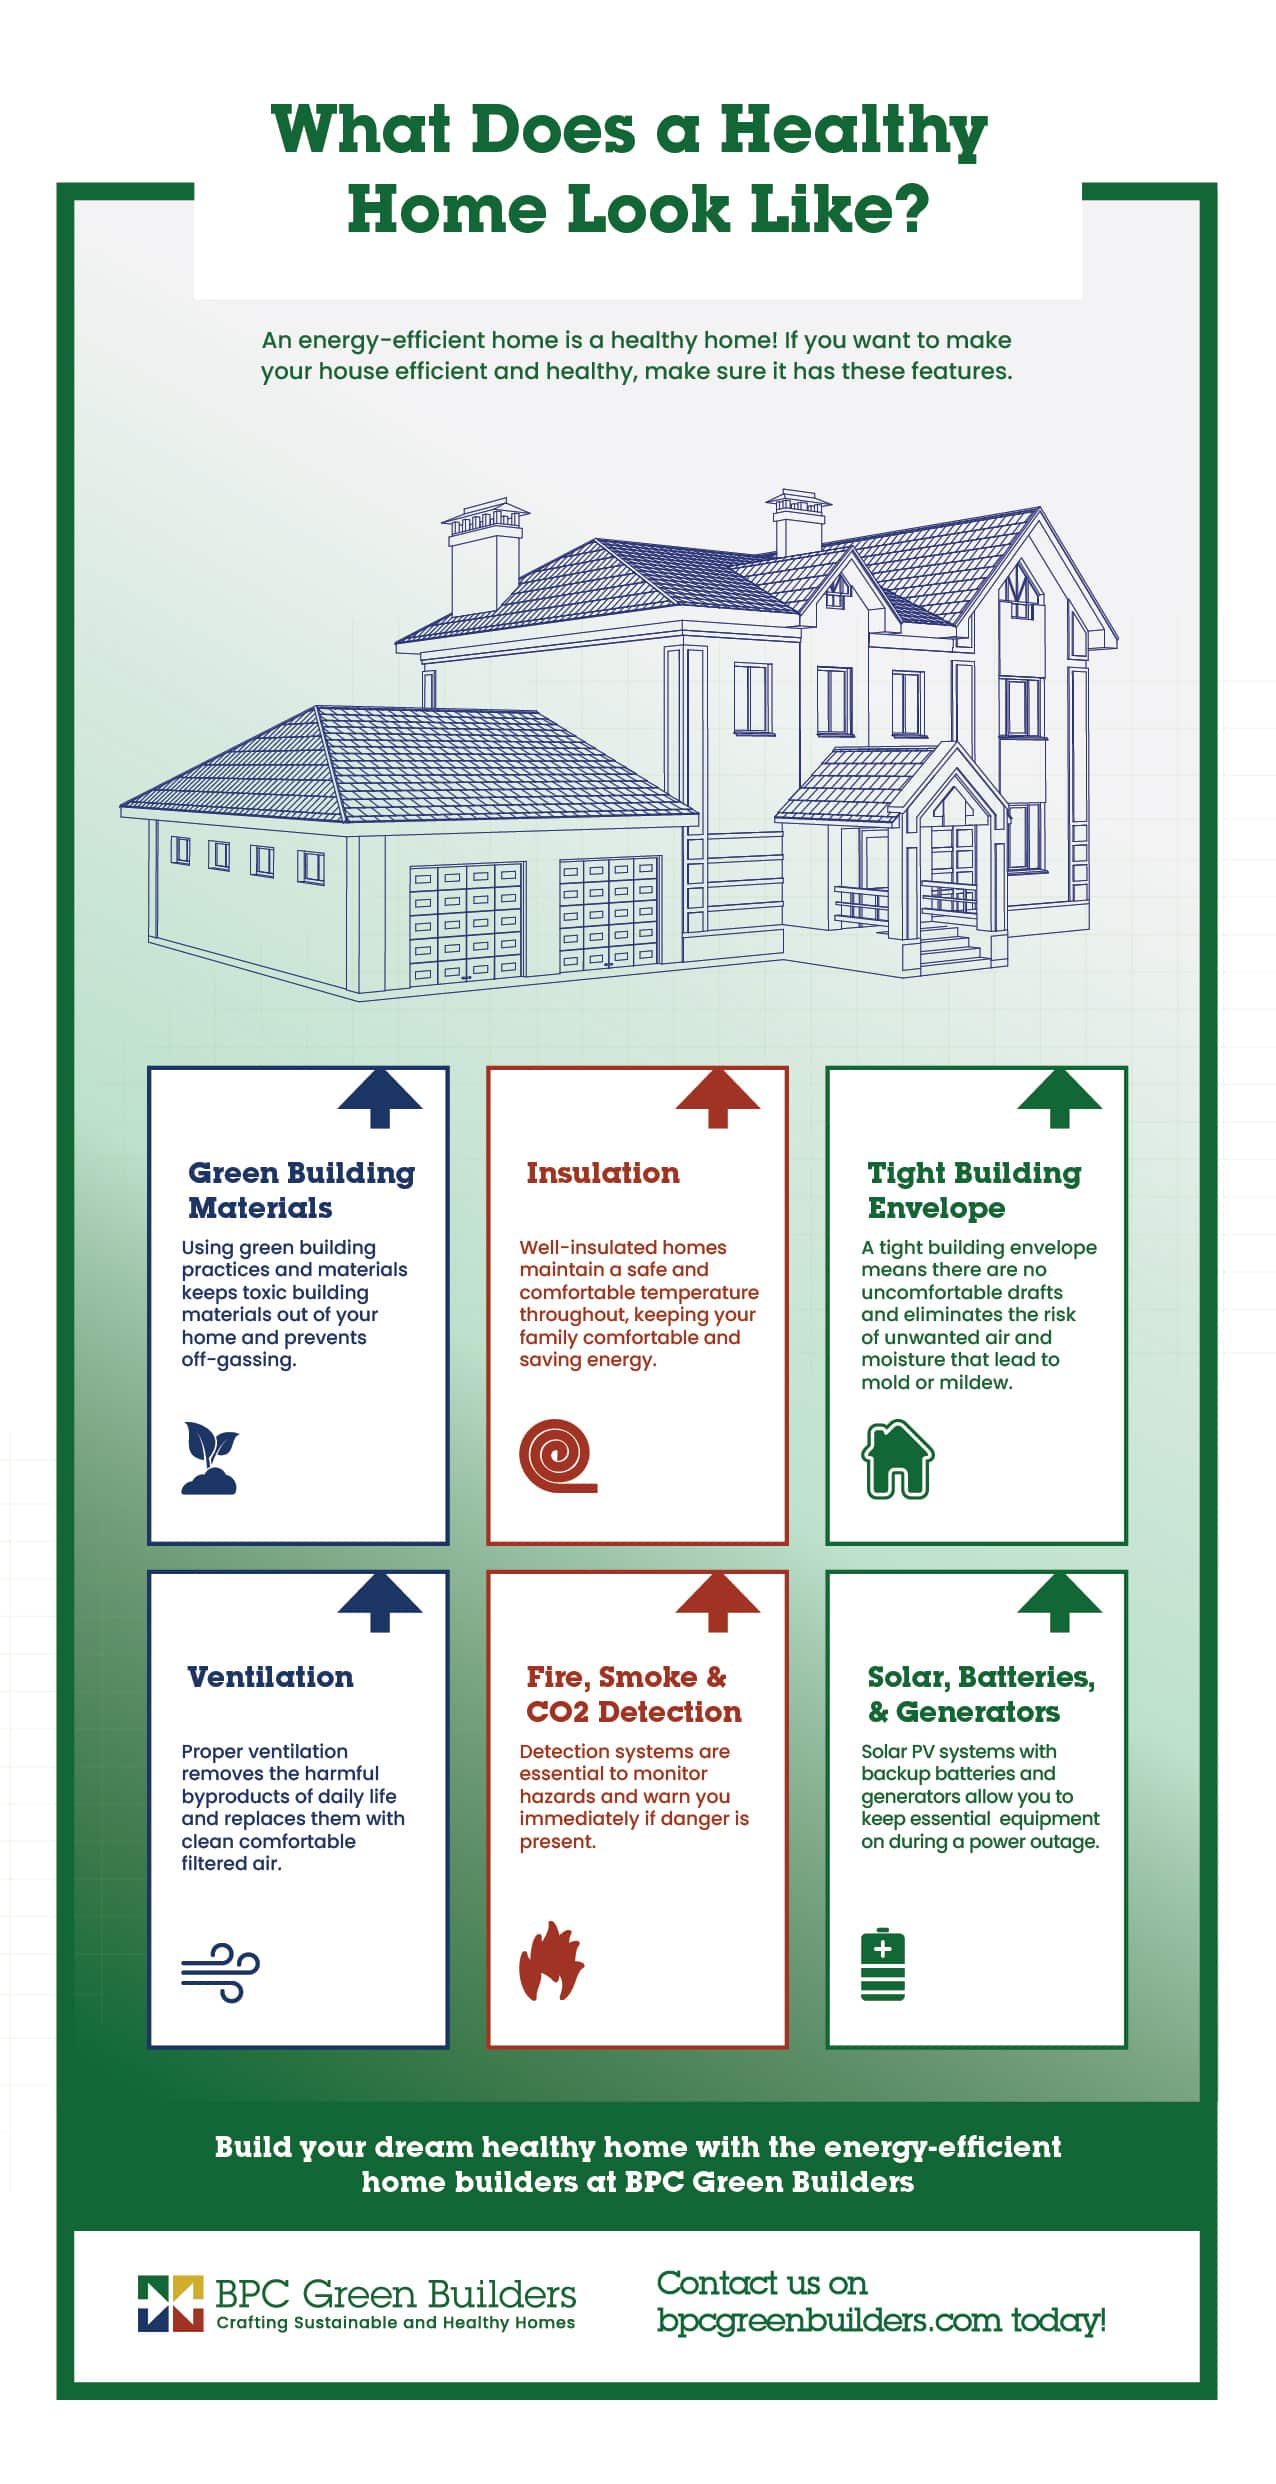 What Does a Healthy Home Look Like? Infographic